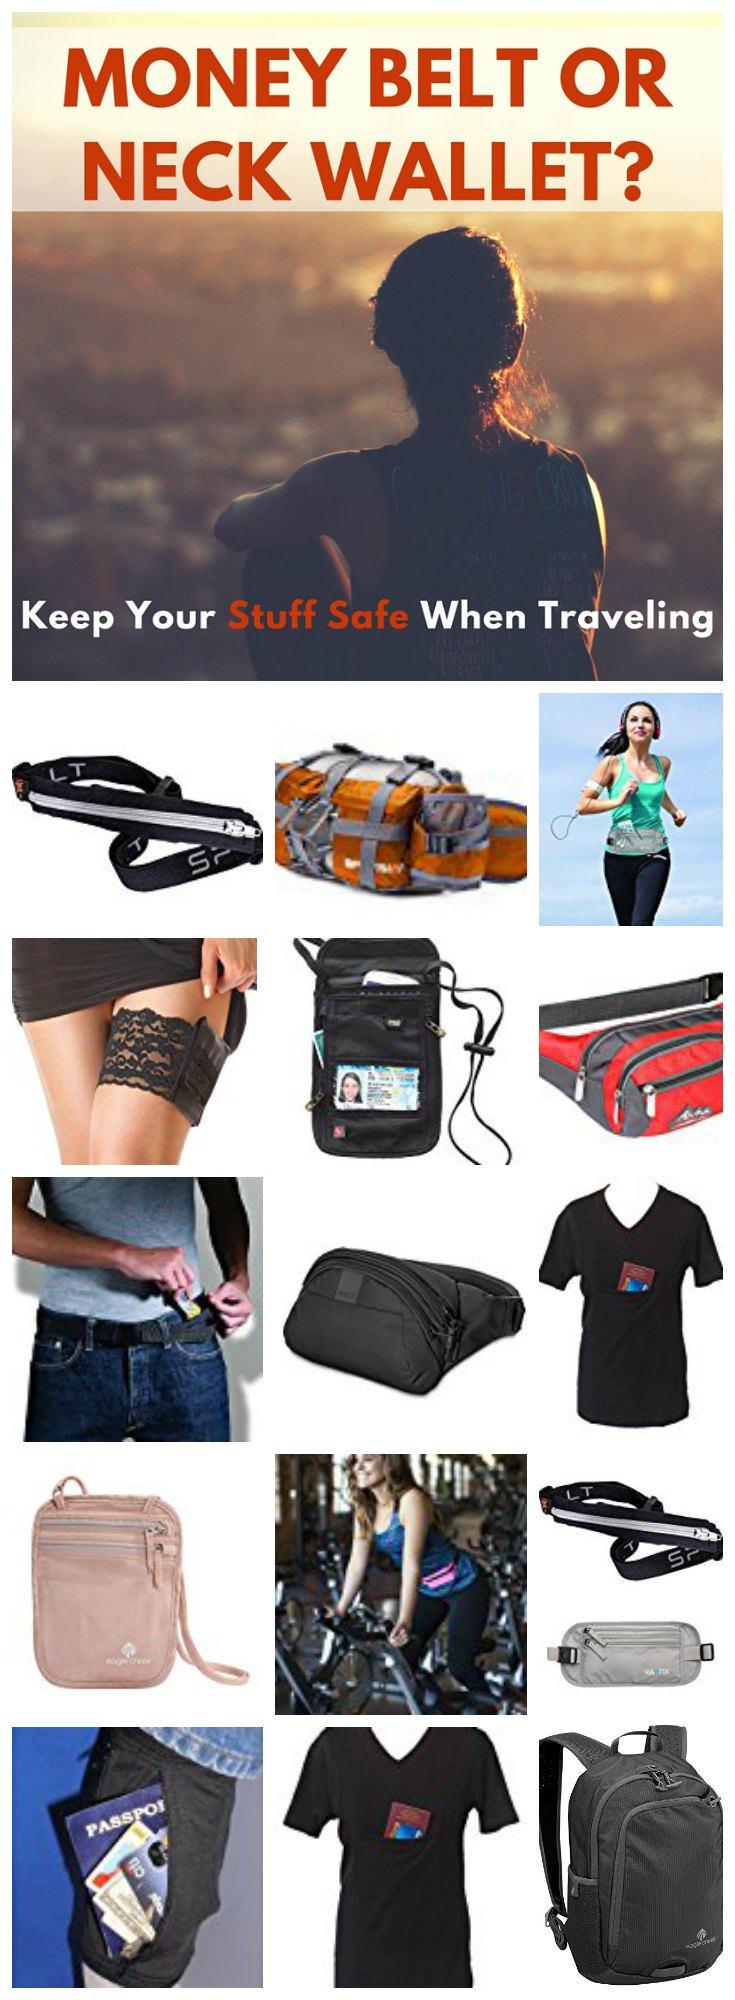 Travel Money Belt for Women And Men - Hidden Wallet for Travel with RFID  Blocking Material - Secure, Waterproof Money Belt for Travel and Daily Use